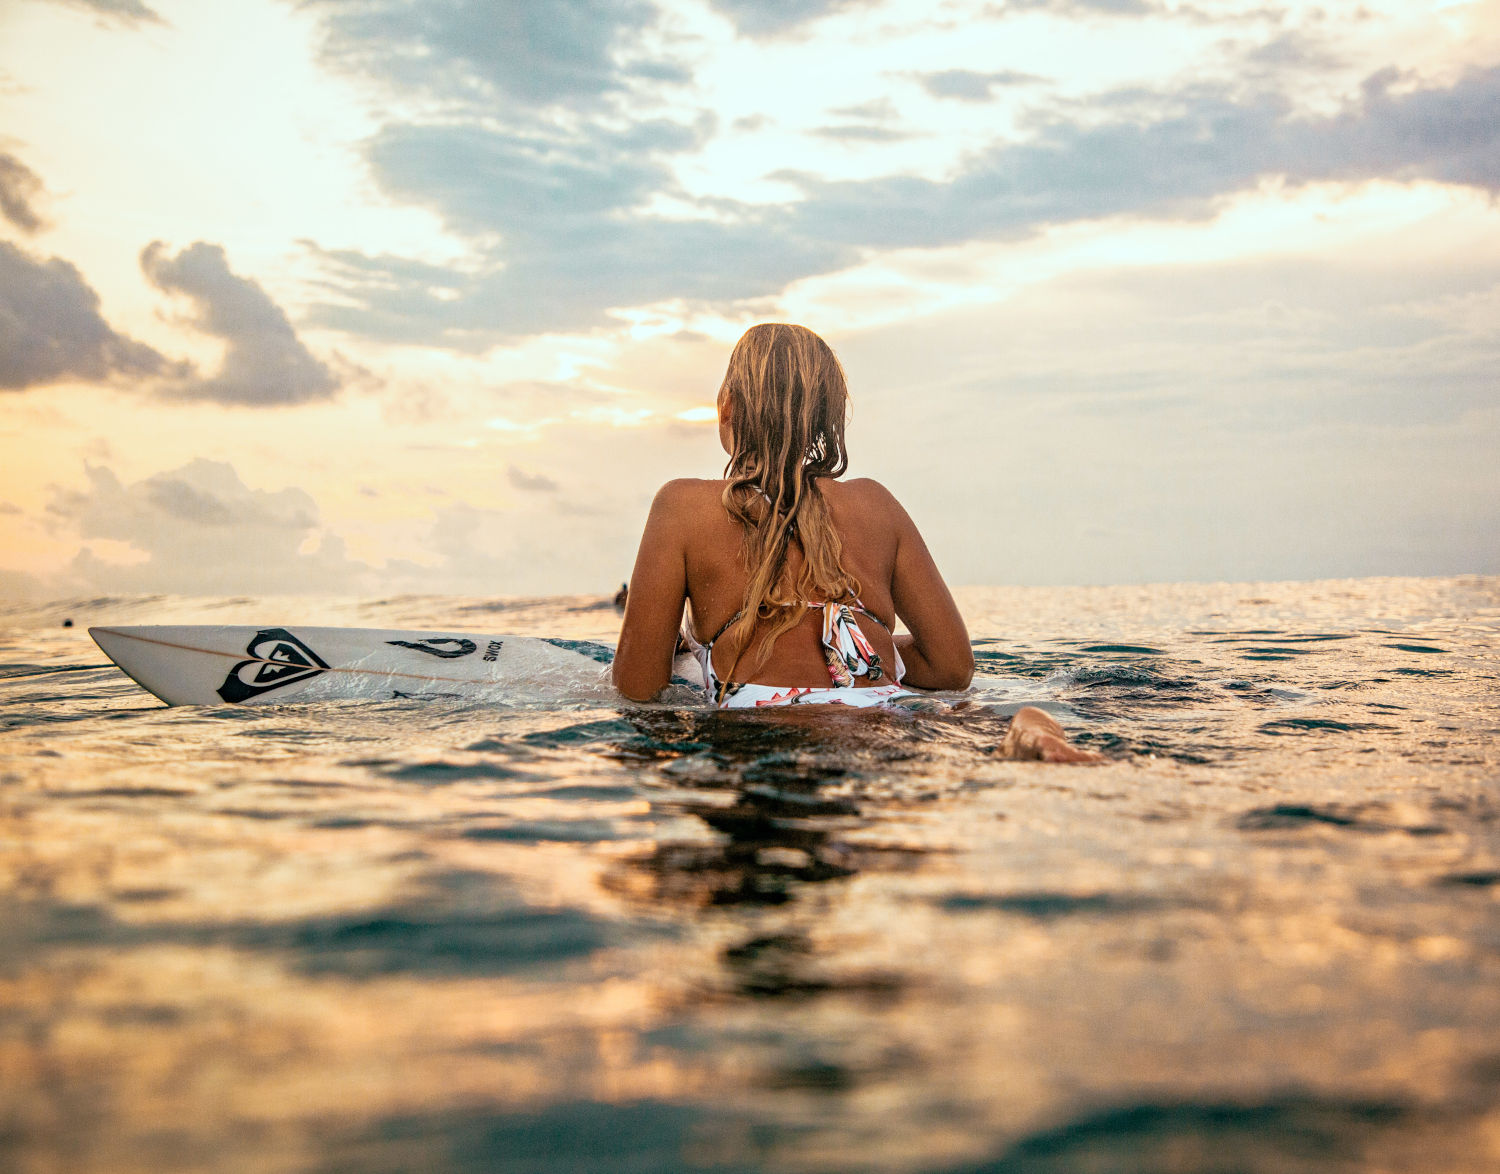 The essential surfing equipment: everything you need to surf